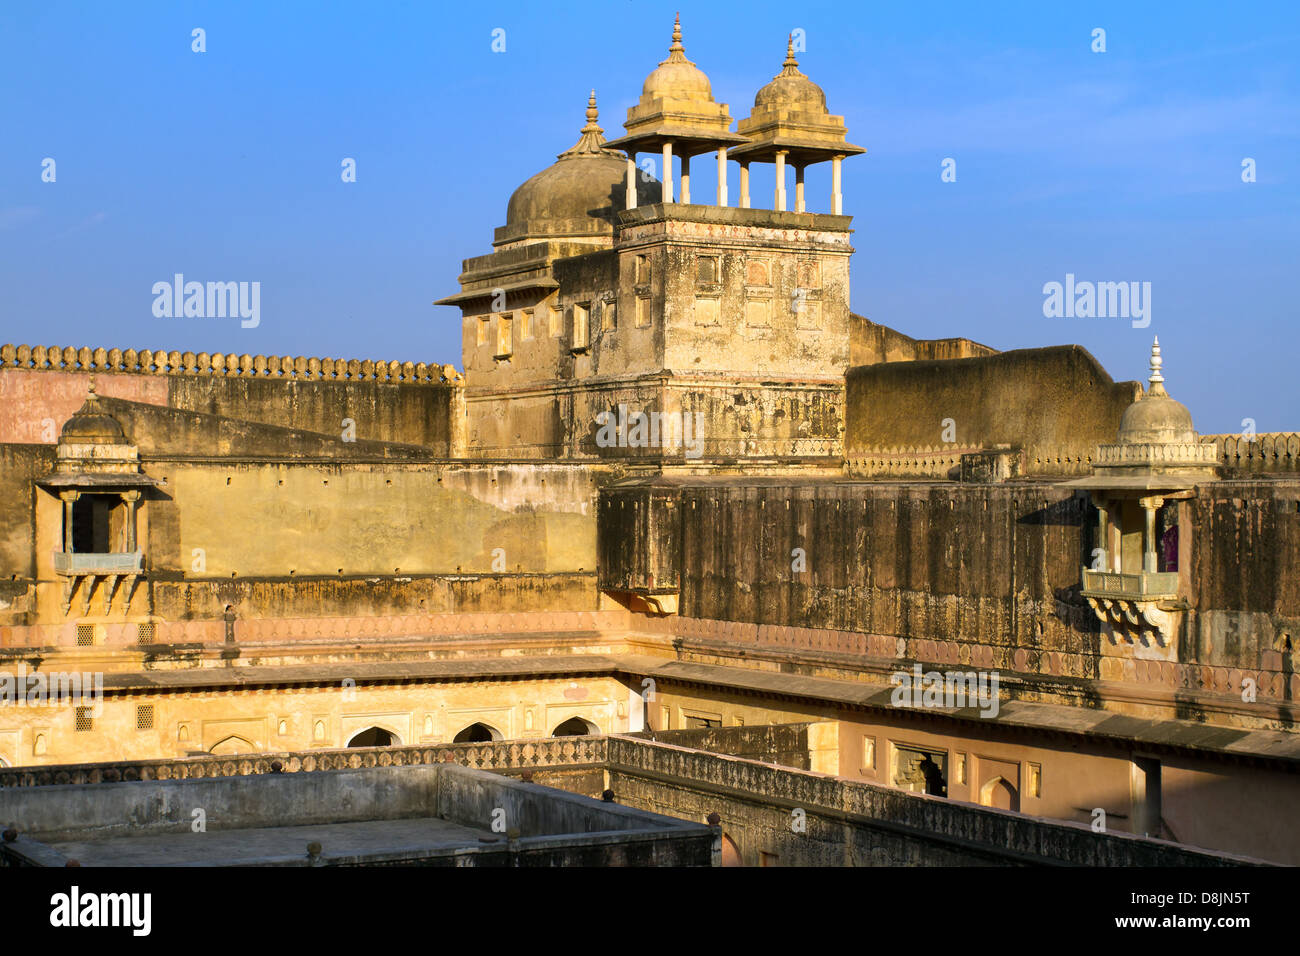 Palace of the Amber Fort near Jaipur, Rajasthan, India Stock Photo